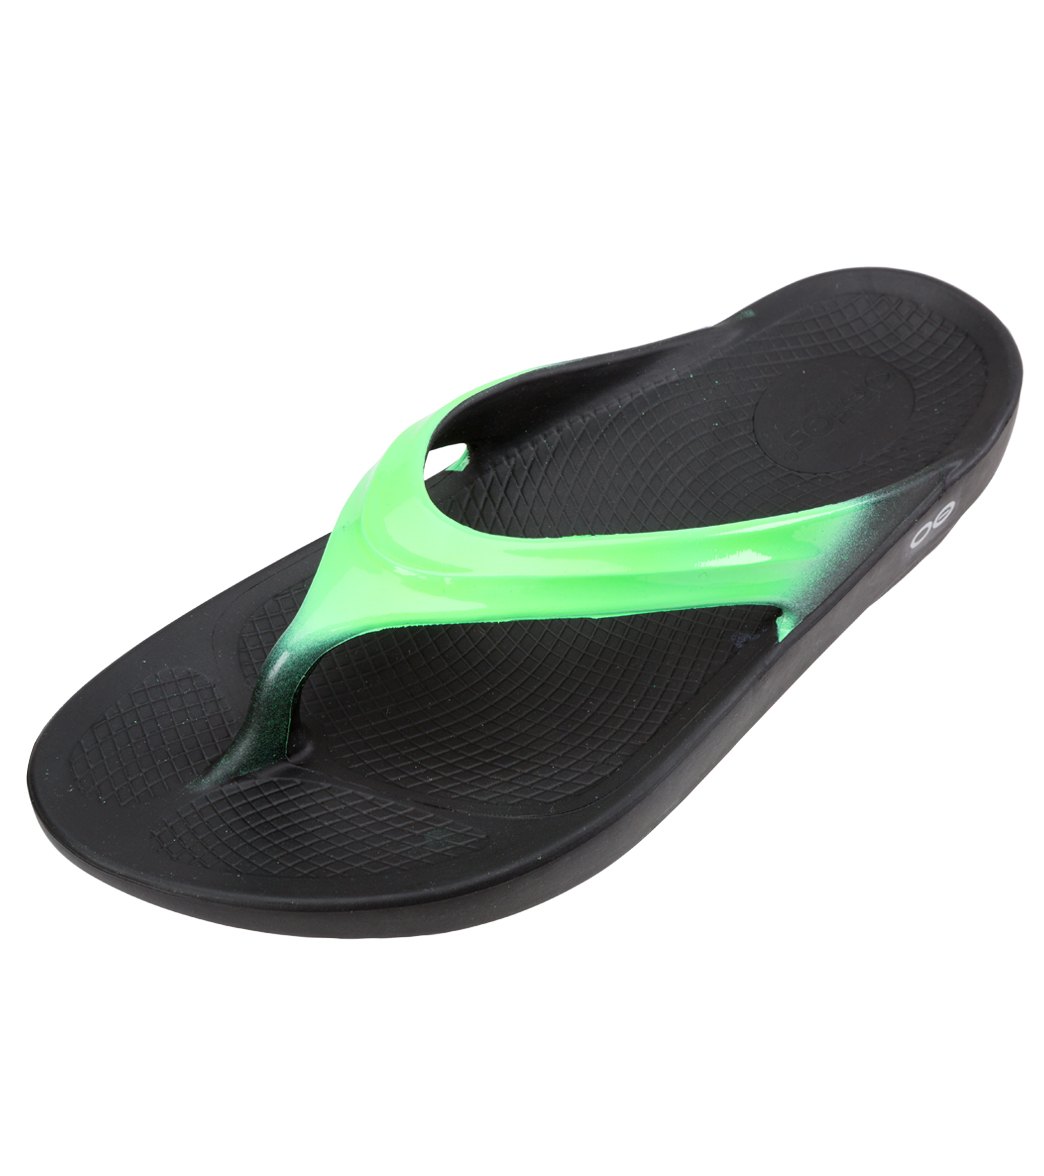 Oofos OOlala Flip Flop at SwimOutlet.com - Free Shipping